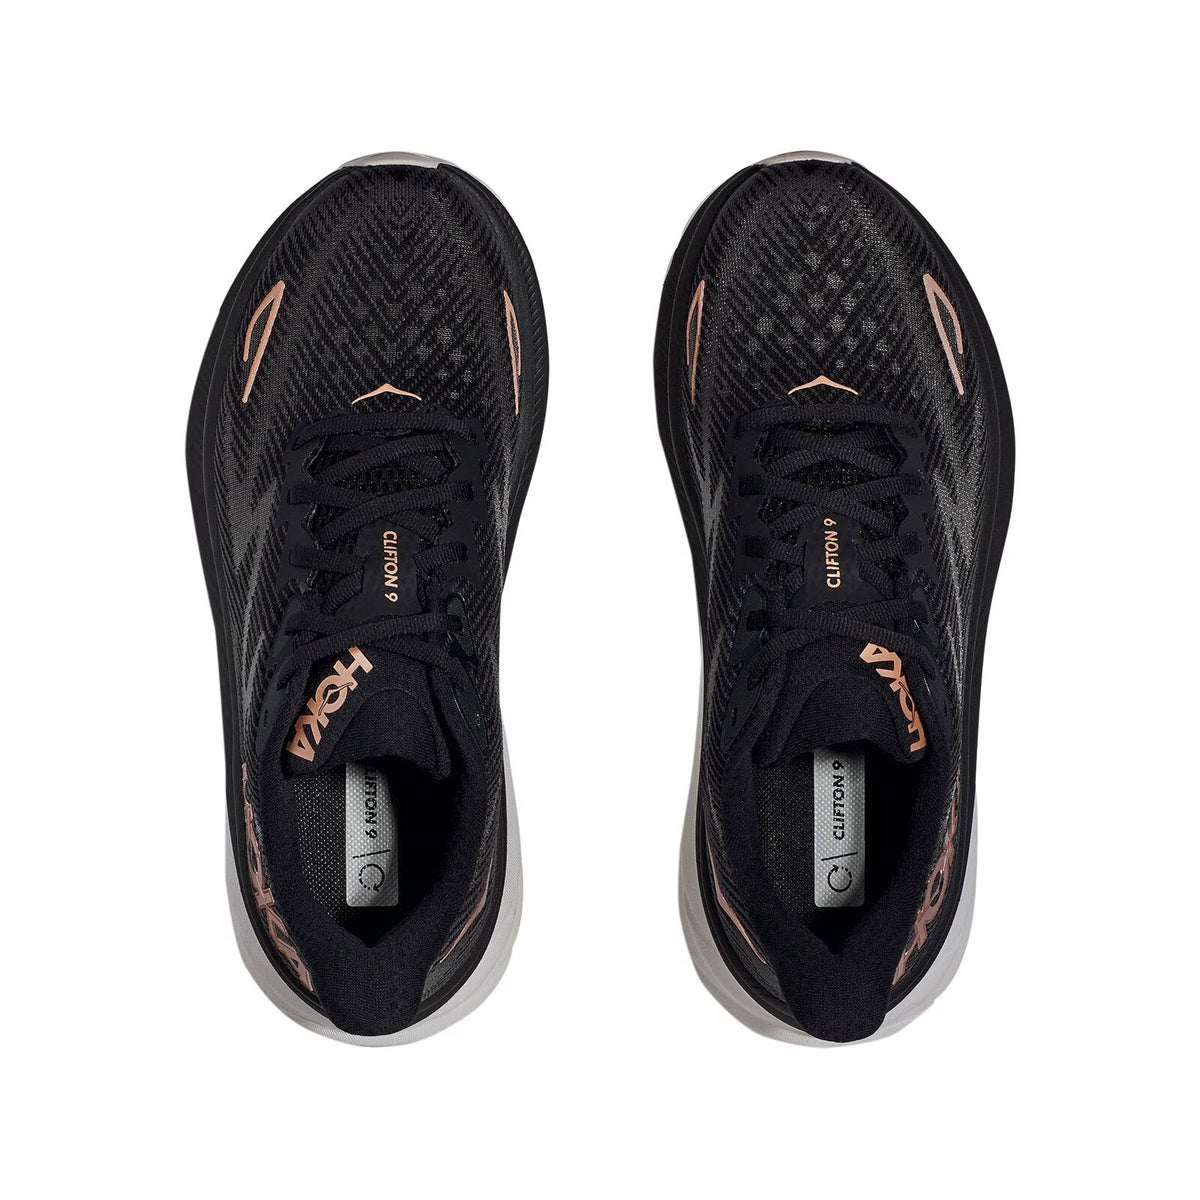 A pair of black HOKA Clifton 9 athletic shoes with rose gold accents and engineered mesh uppers, viewed from above.